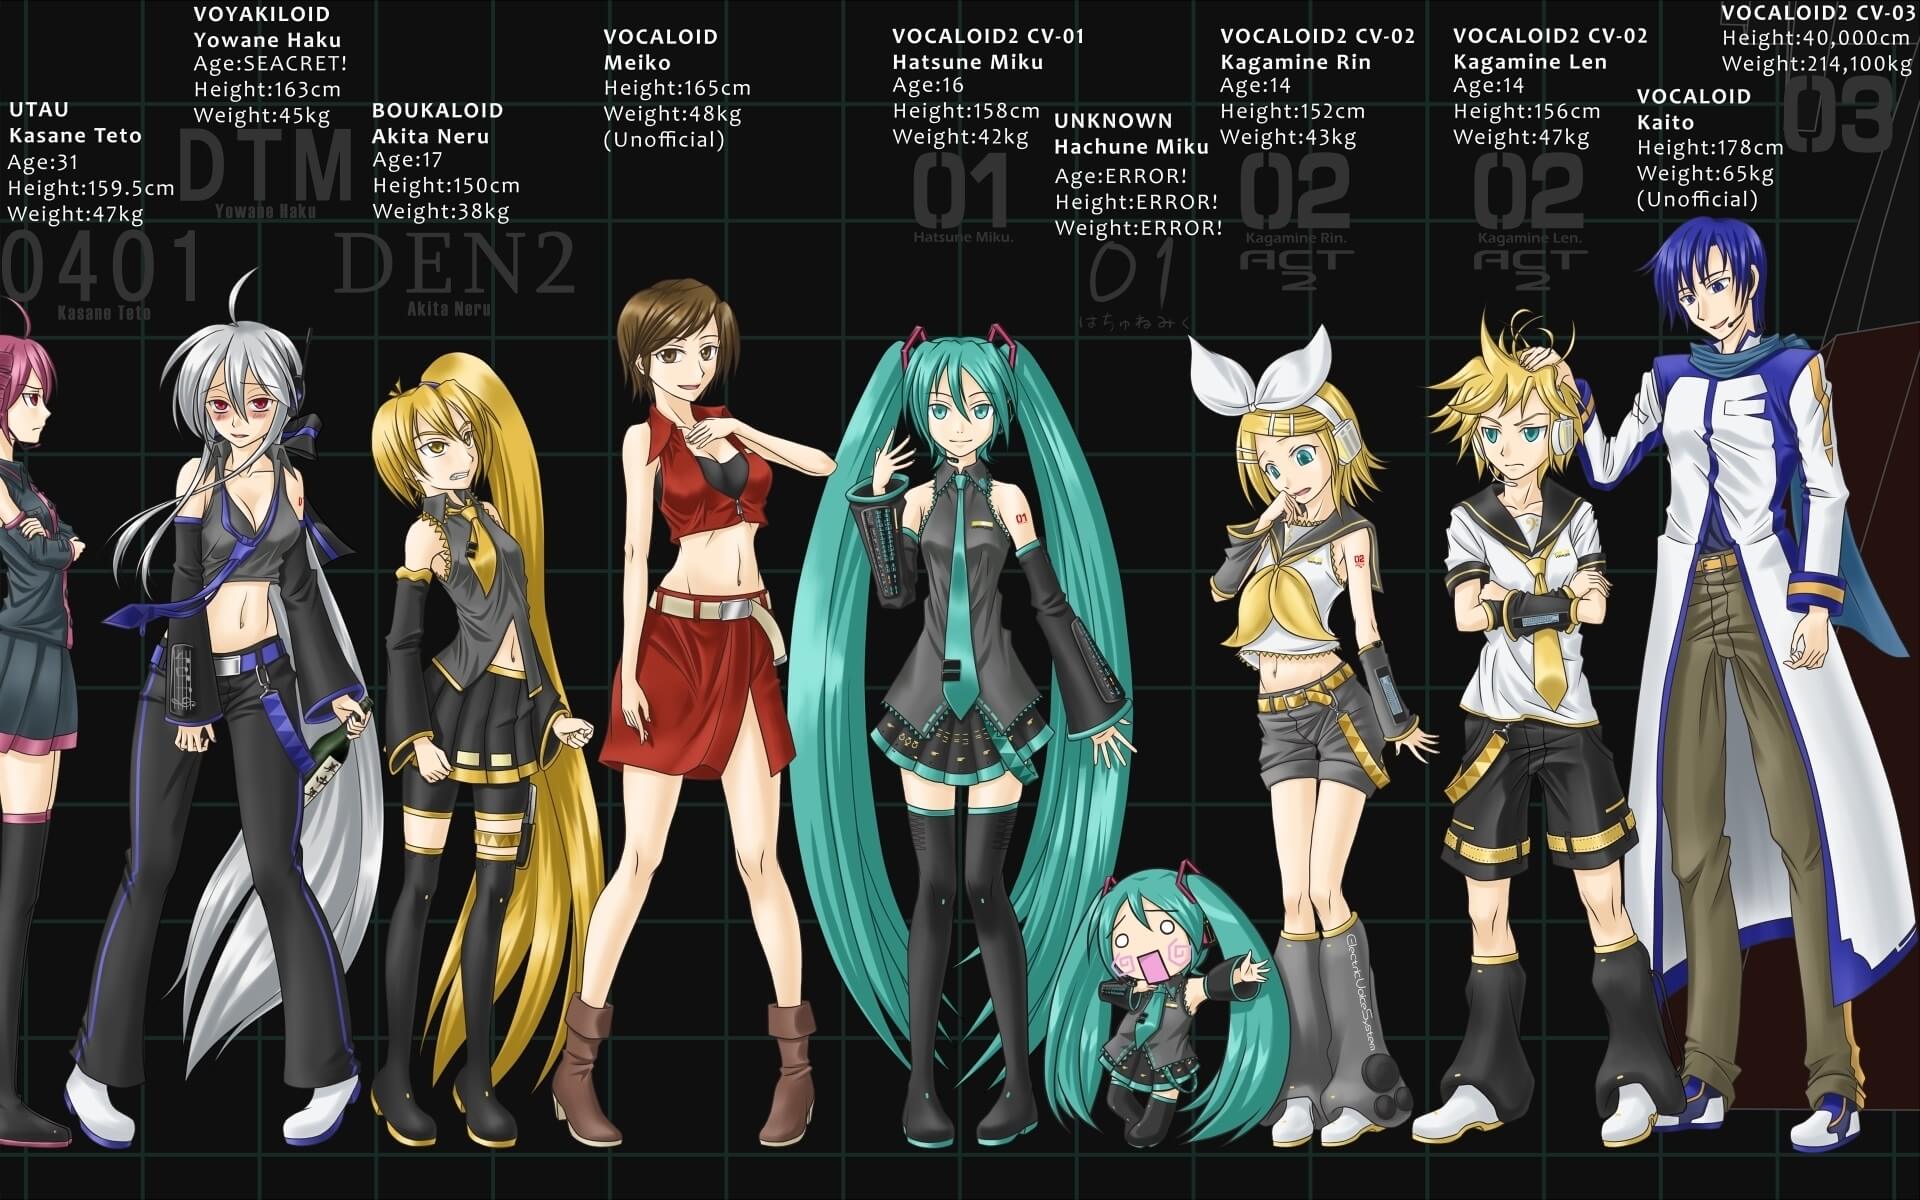 otaku image by jose What is Vocaloid??